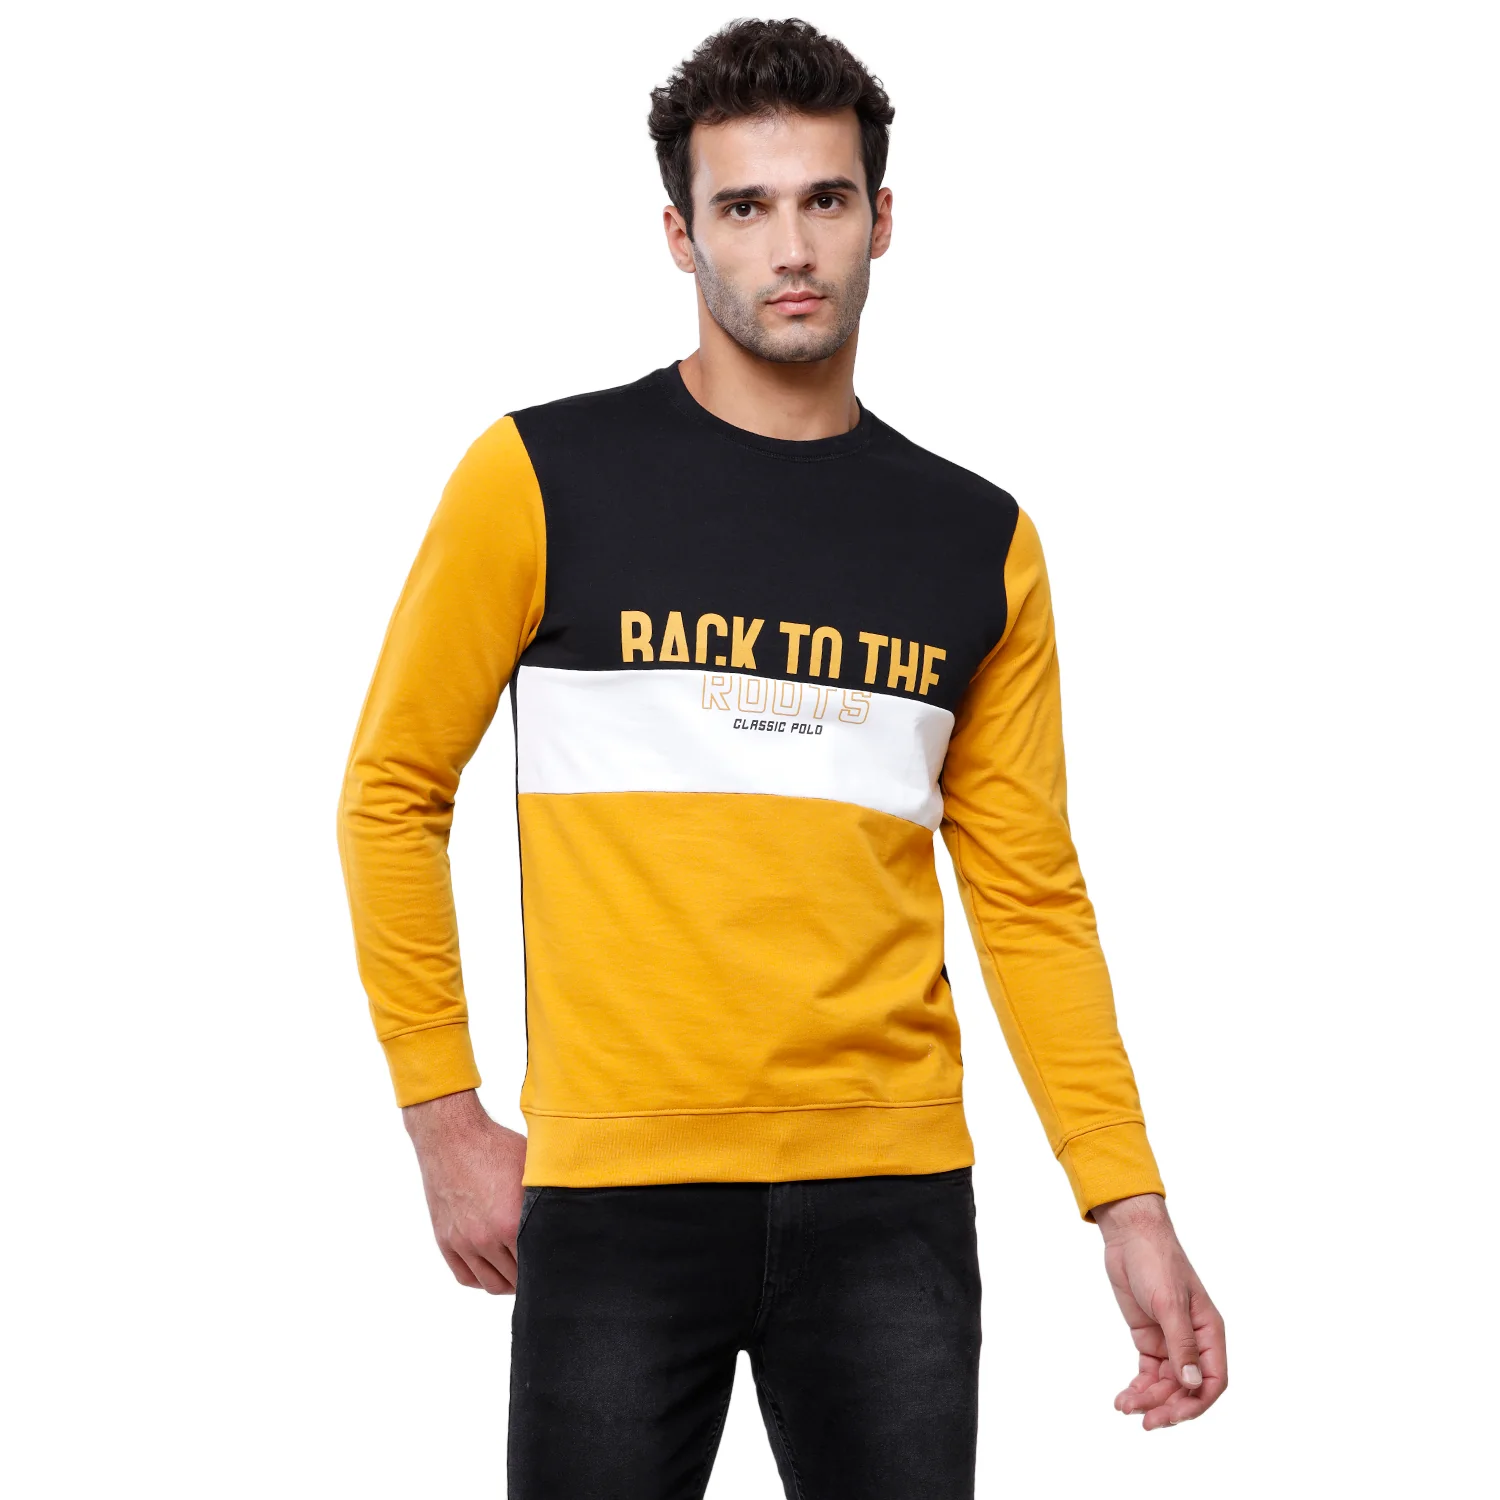 Classic Polo Men's Color Block Full Sleeve Navy & Yellow Sweat Shirt - CPSS-314 B